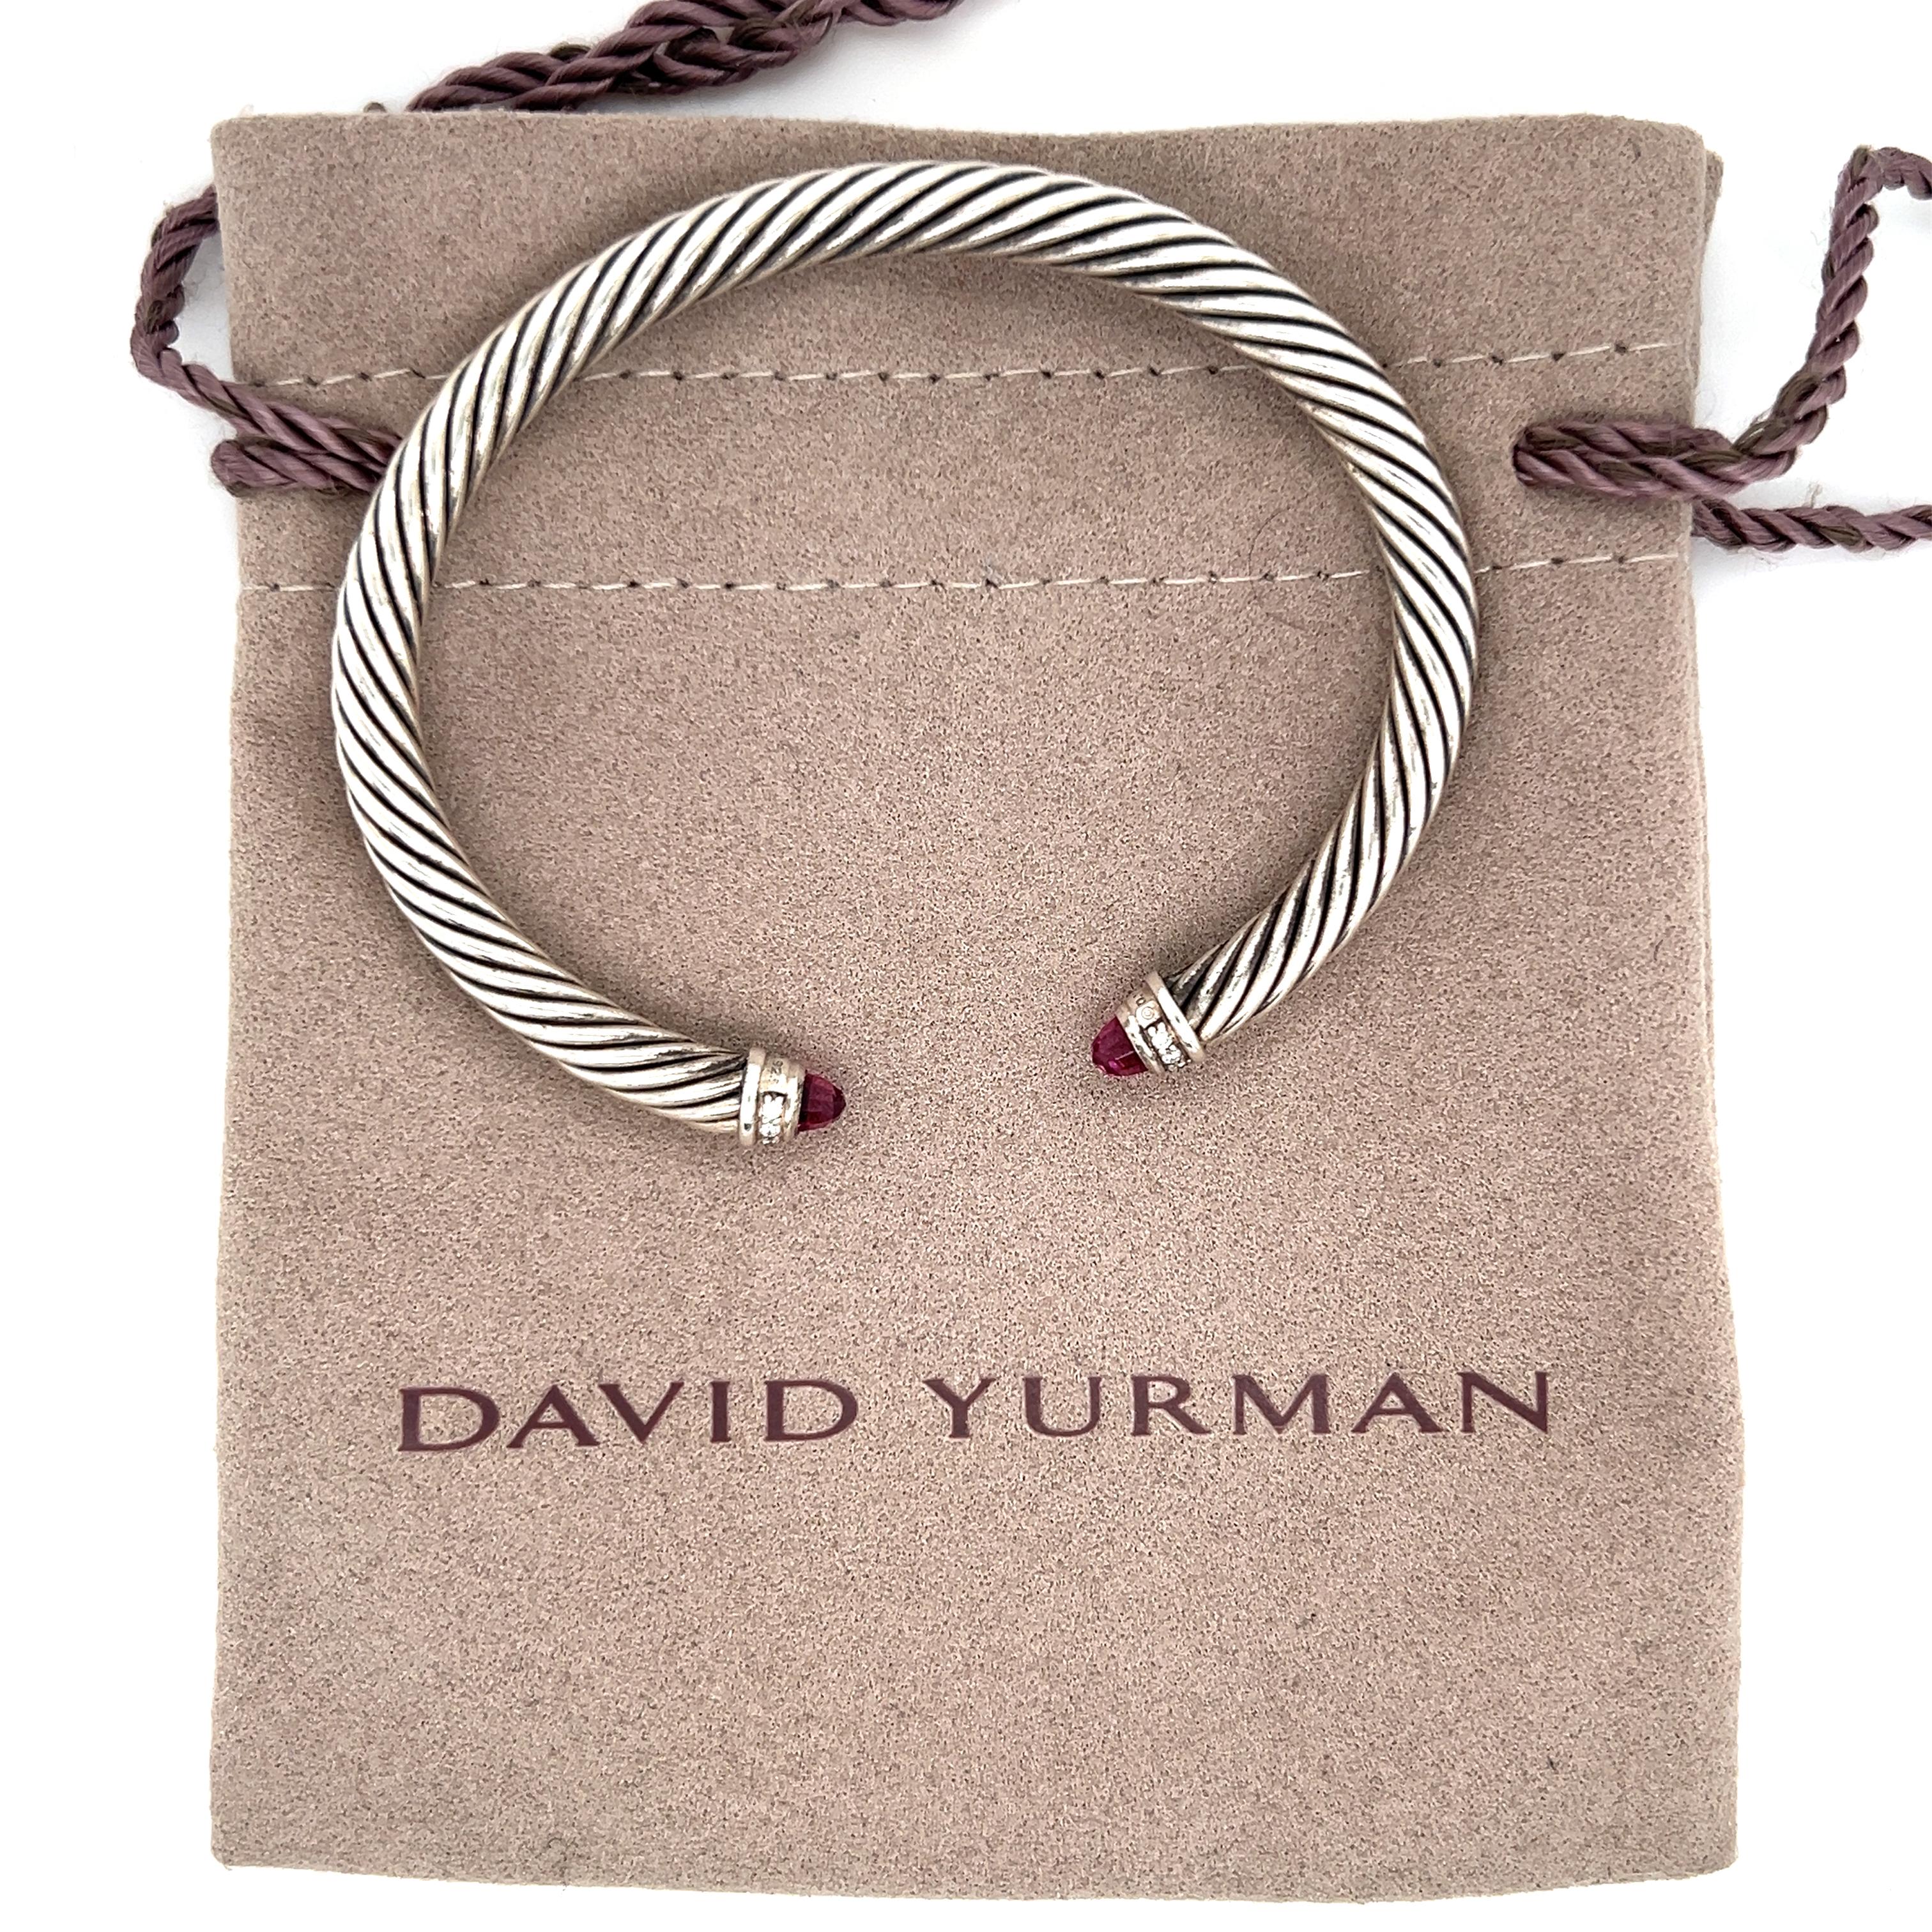 David Yurman Sterling Silver 14K Yellow Gold and Garnets 5mm Classic Cable Bangle Bracelet

Sterling silver & 14k yellow gold
Weight: 26.19 grams
Width: 5mm
Approx. 6.75 inches

SHIPS WITH ORIGINAL DAVID YURMAN POUCH
MSRP: $695
